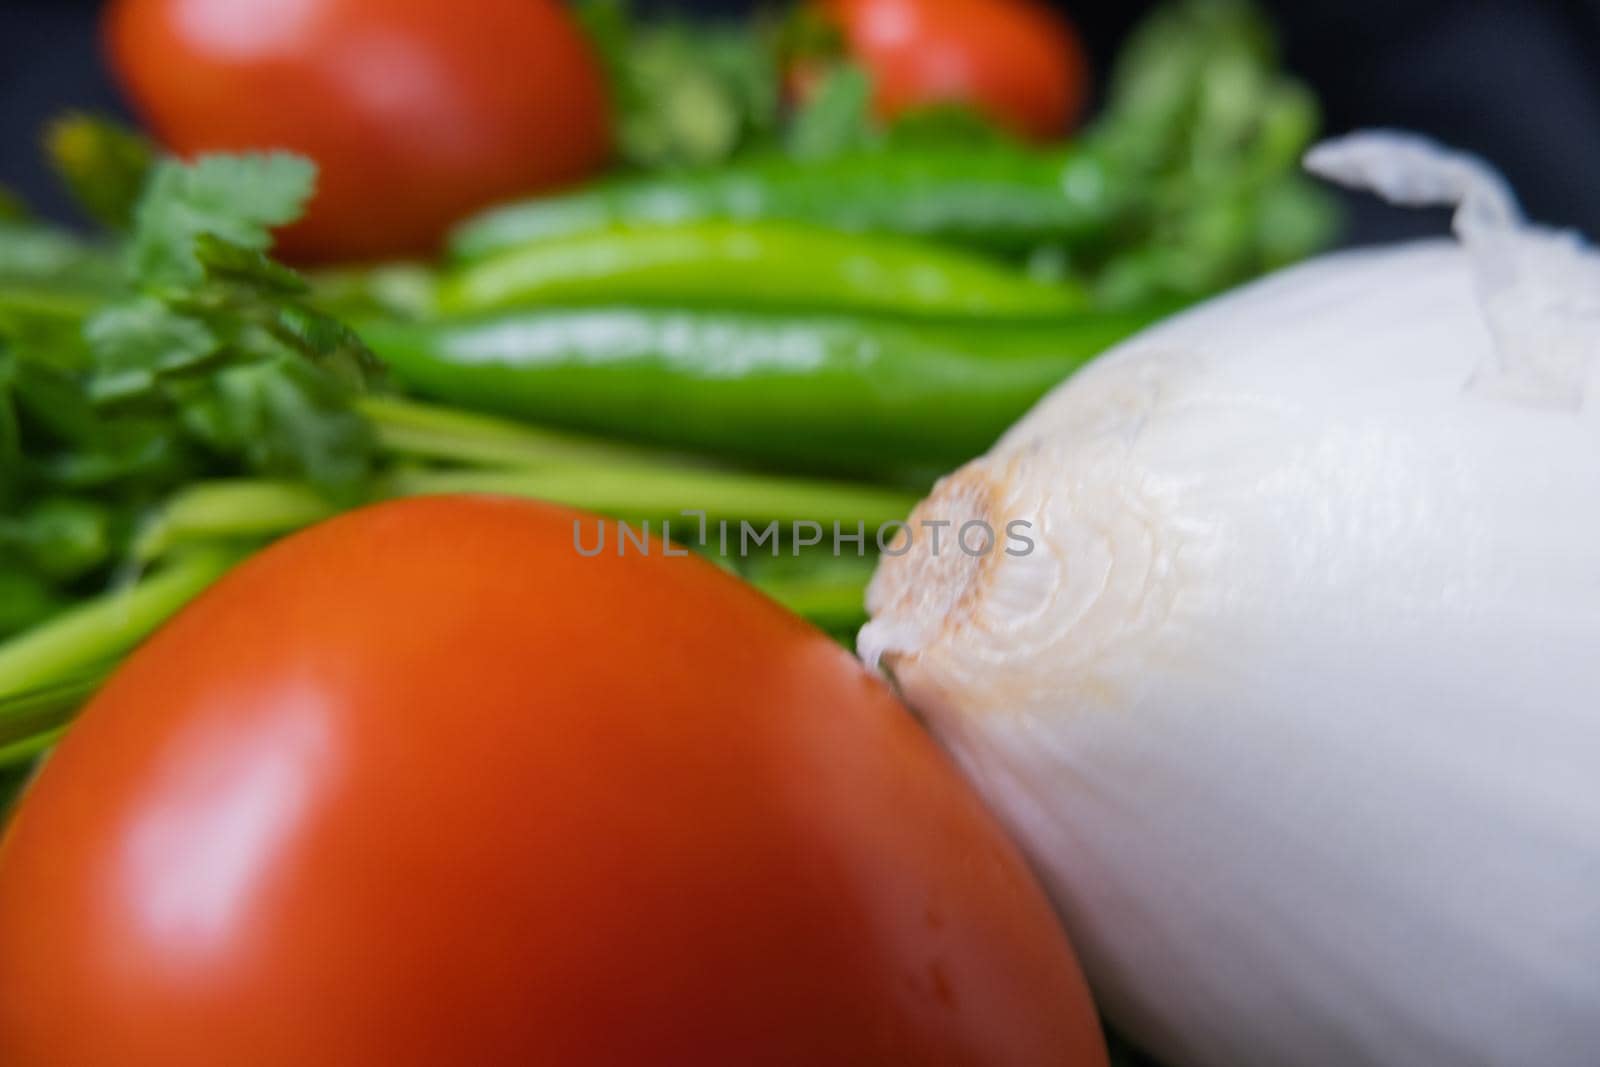 Close-up of onion, tomato, and three green chili peppers above coriander. Fresh and aromatic green, white, and red vegetables up close. Healthy meal preparation